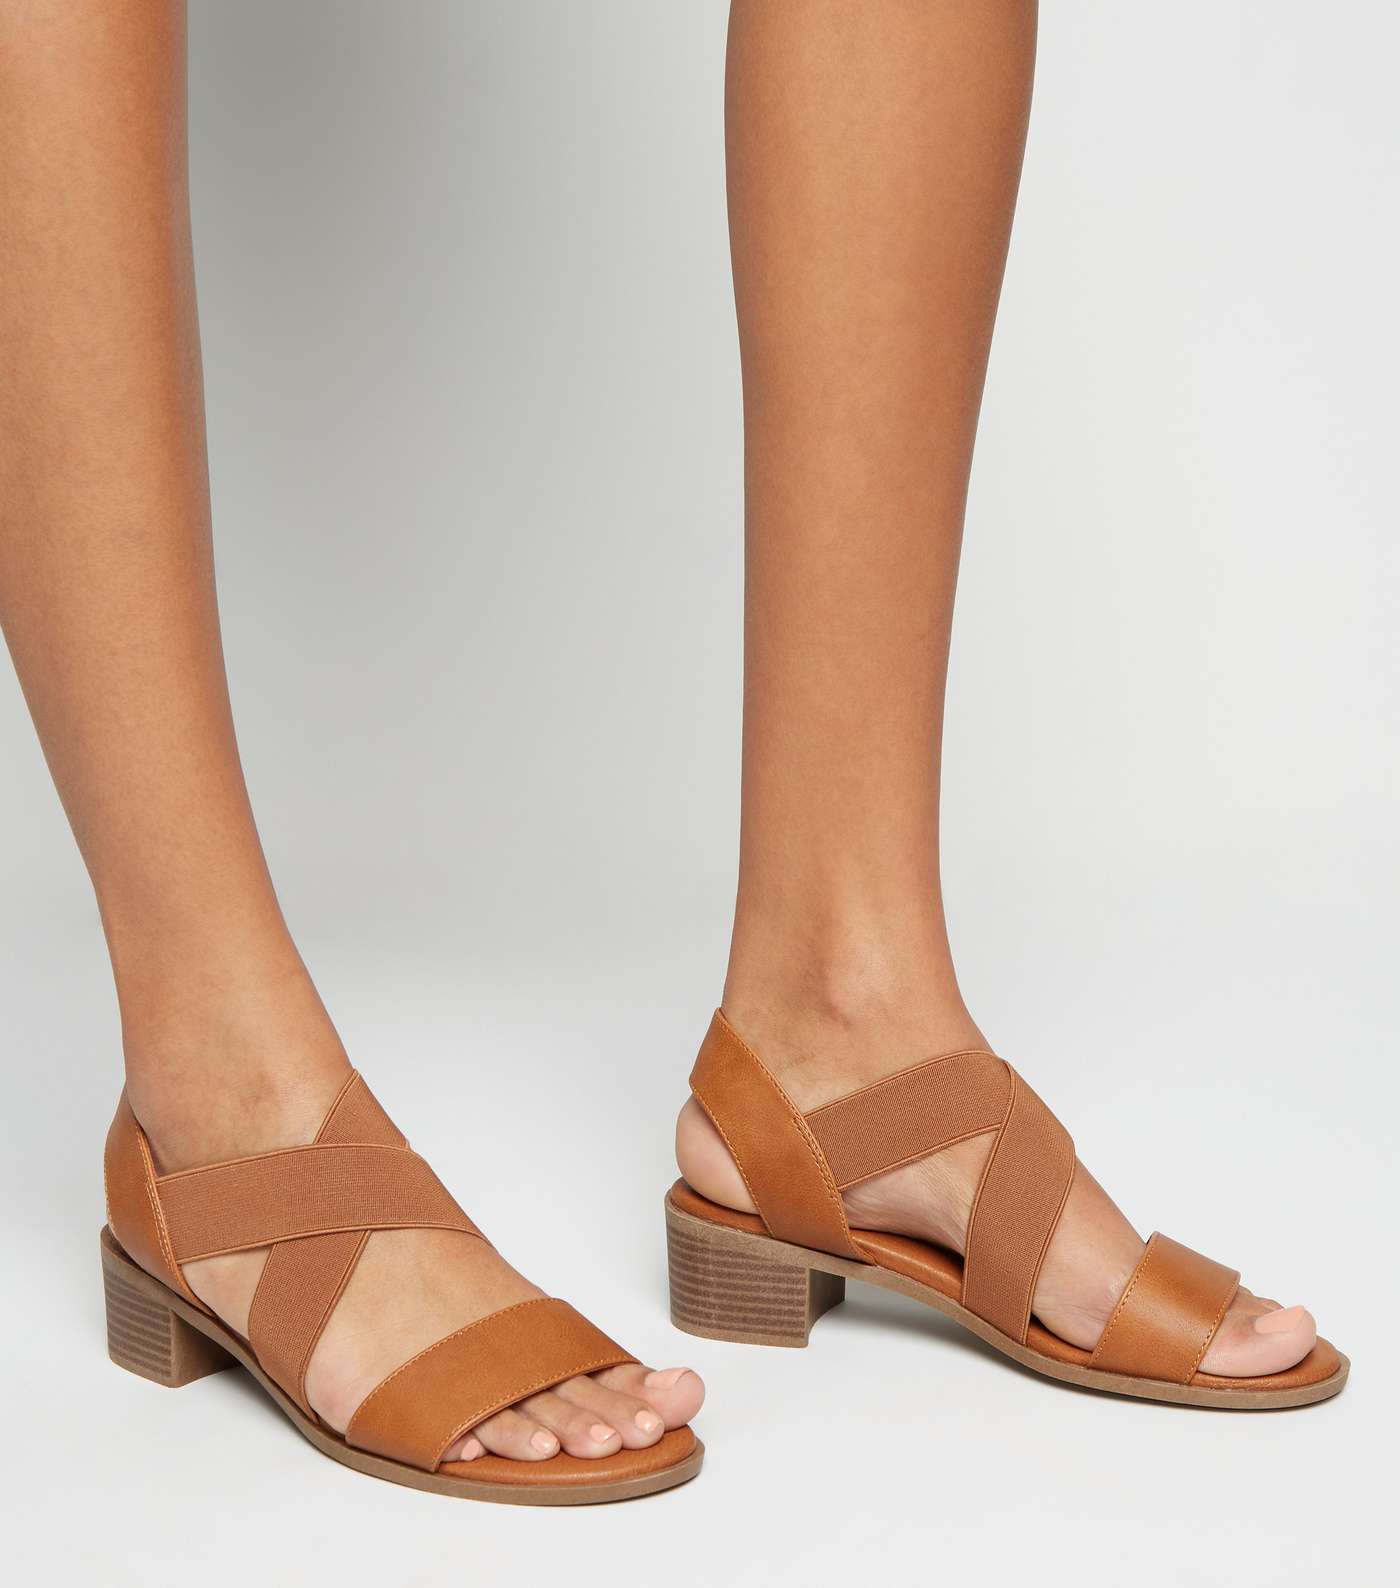 Wide Fit Tan Elastic Strappy Low Heel Sandals Image 2